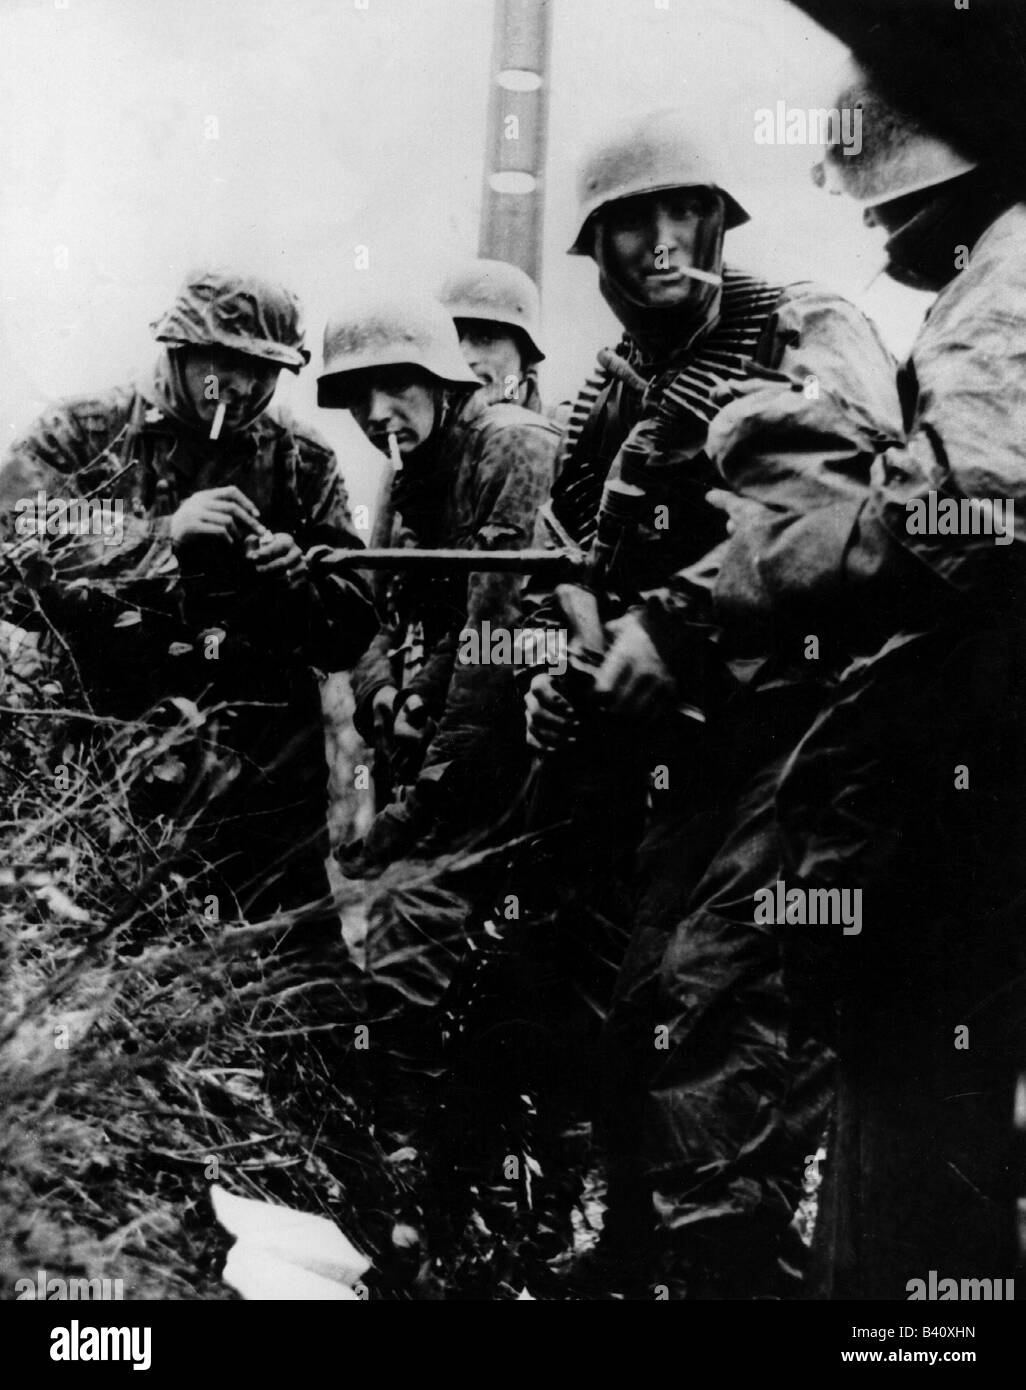 events, Second World War / WWII, Belgium, Battle of the Bulge, German advance 16.-27.12.1944, Waffen-SS troopers during a cigarette break, 17.12.1944, Stock Photo